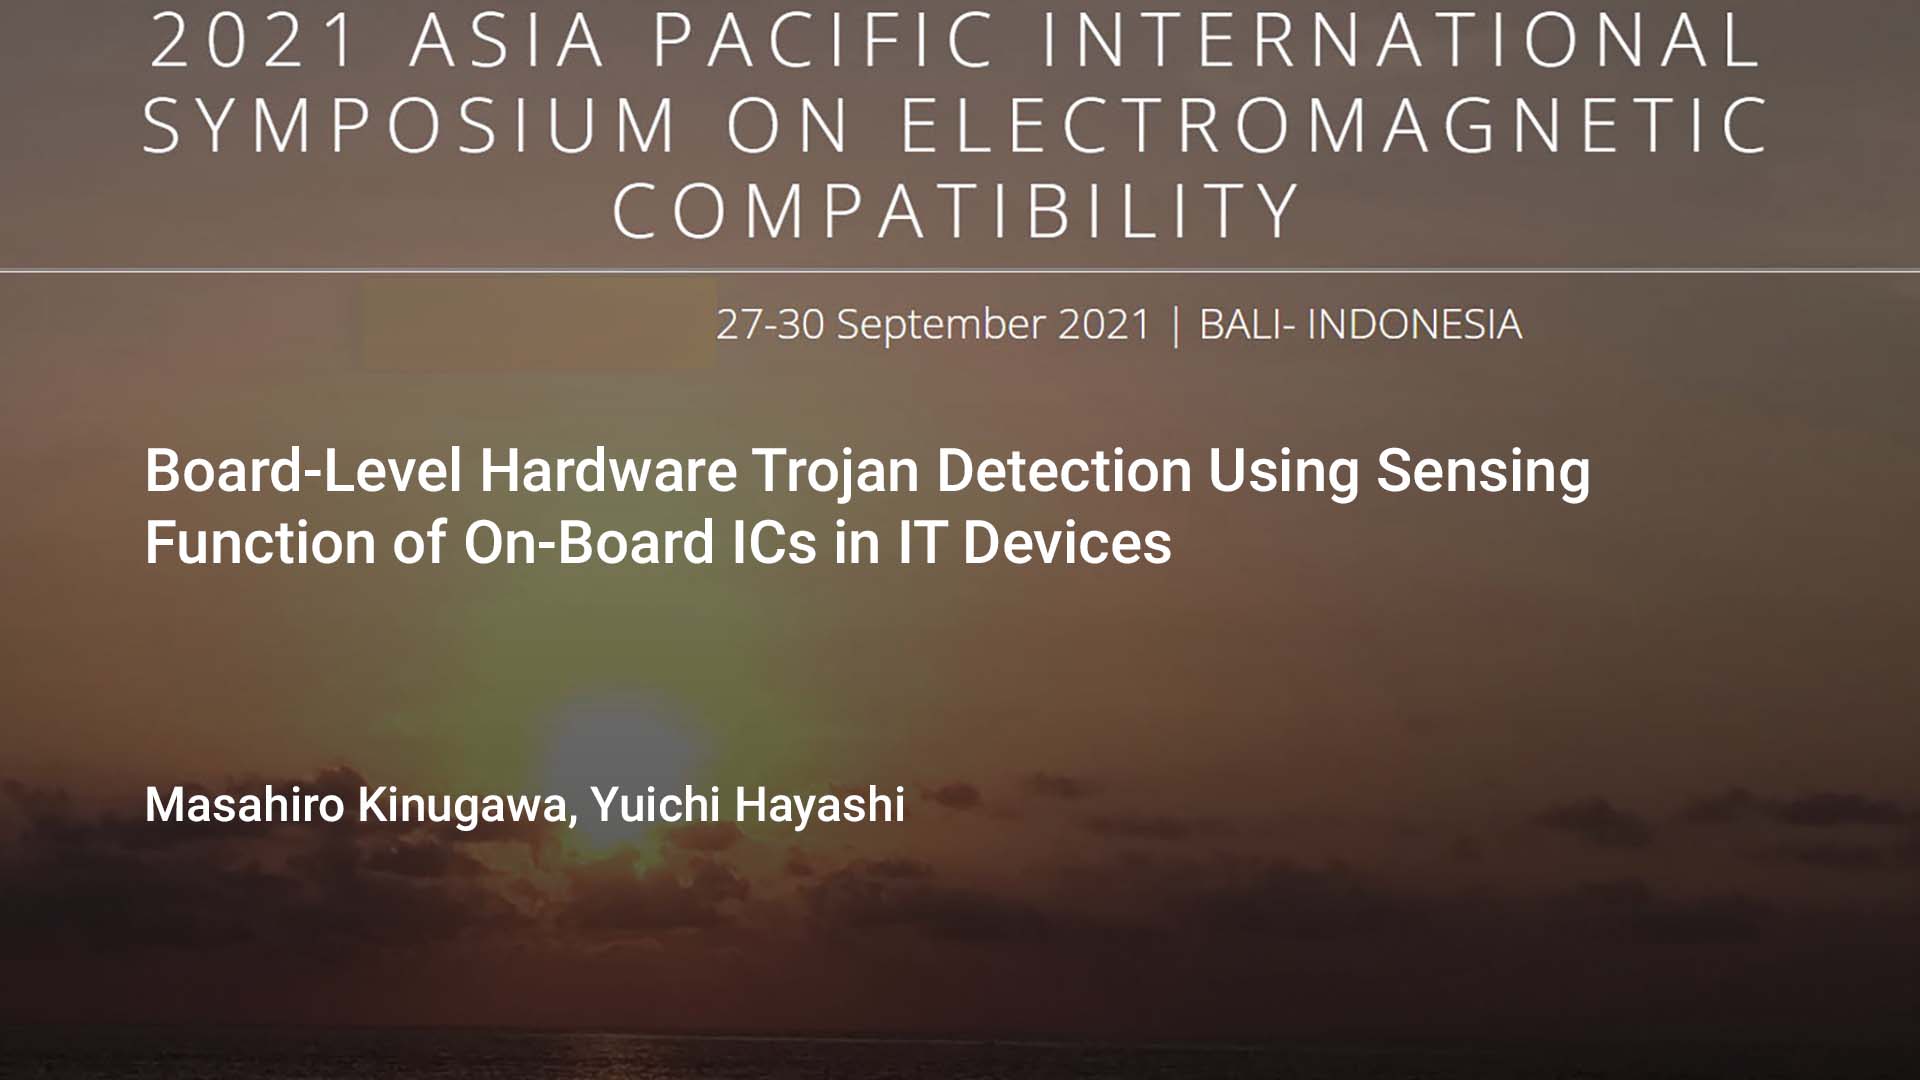 Board-Level Hardware Trojan Detection Using Sensing Function of On-Board ICs in IT Devices